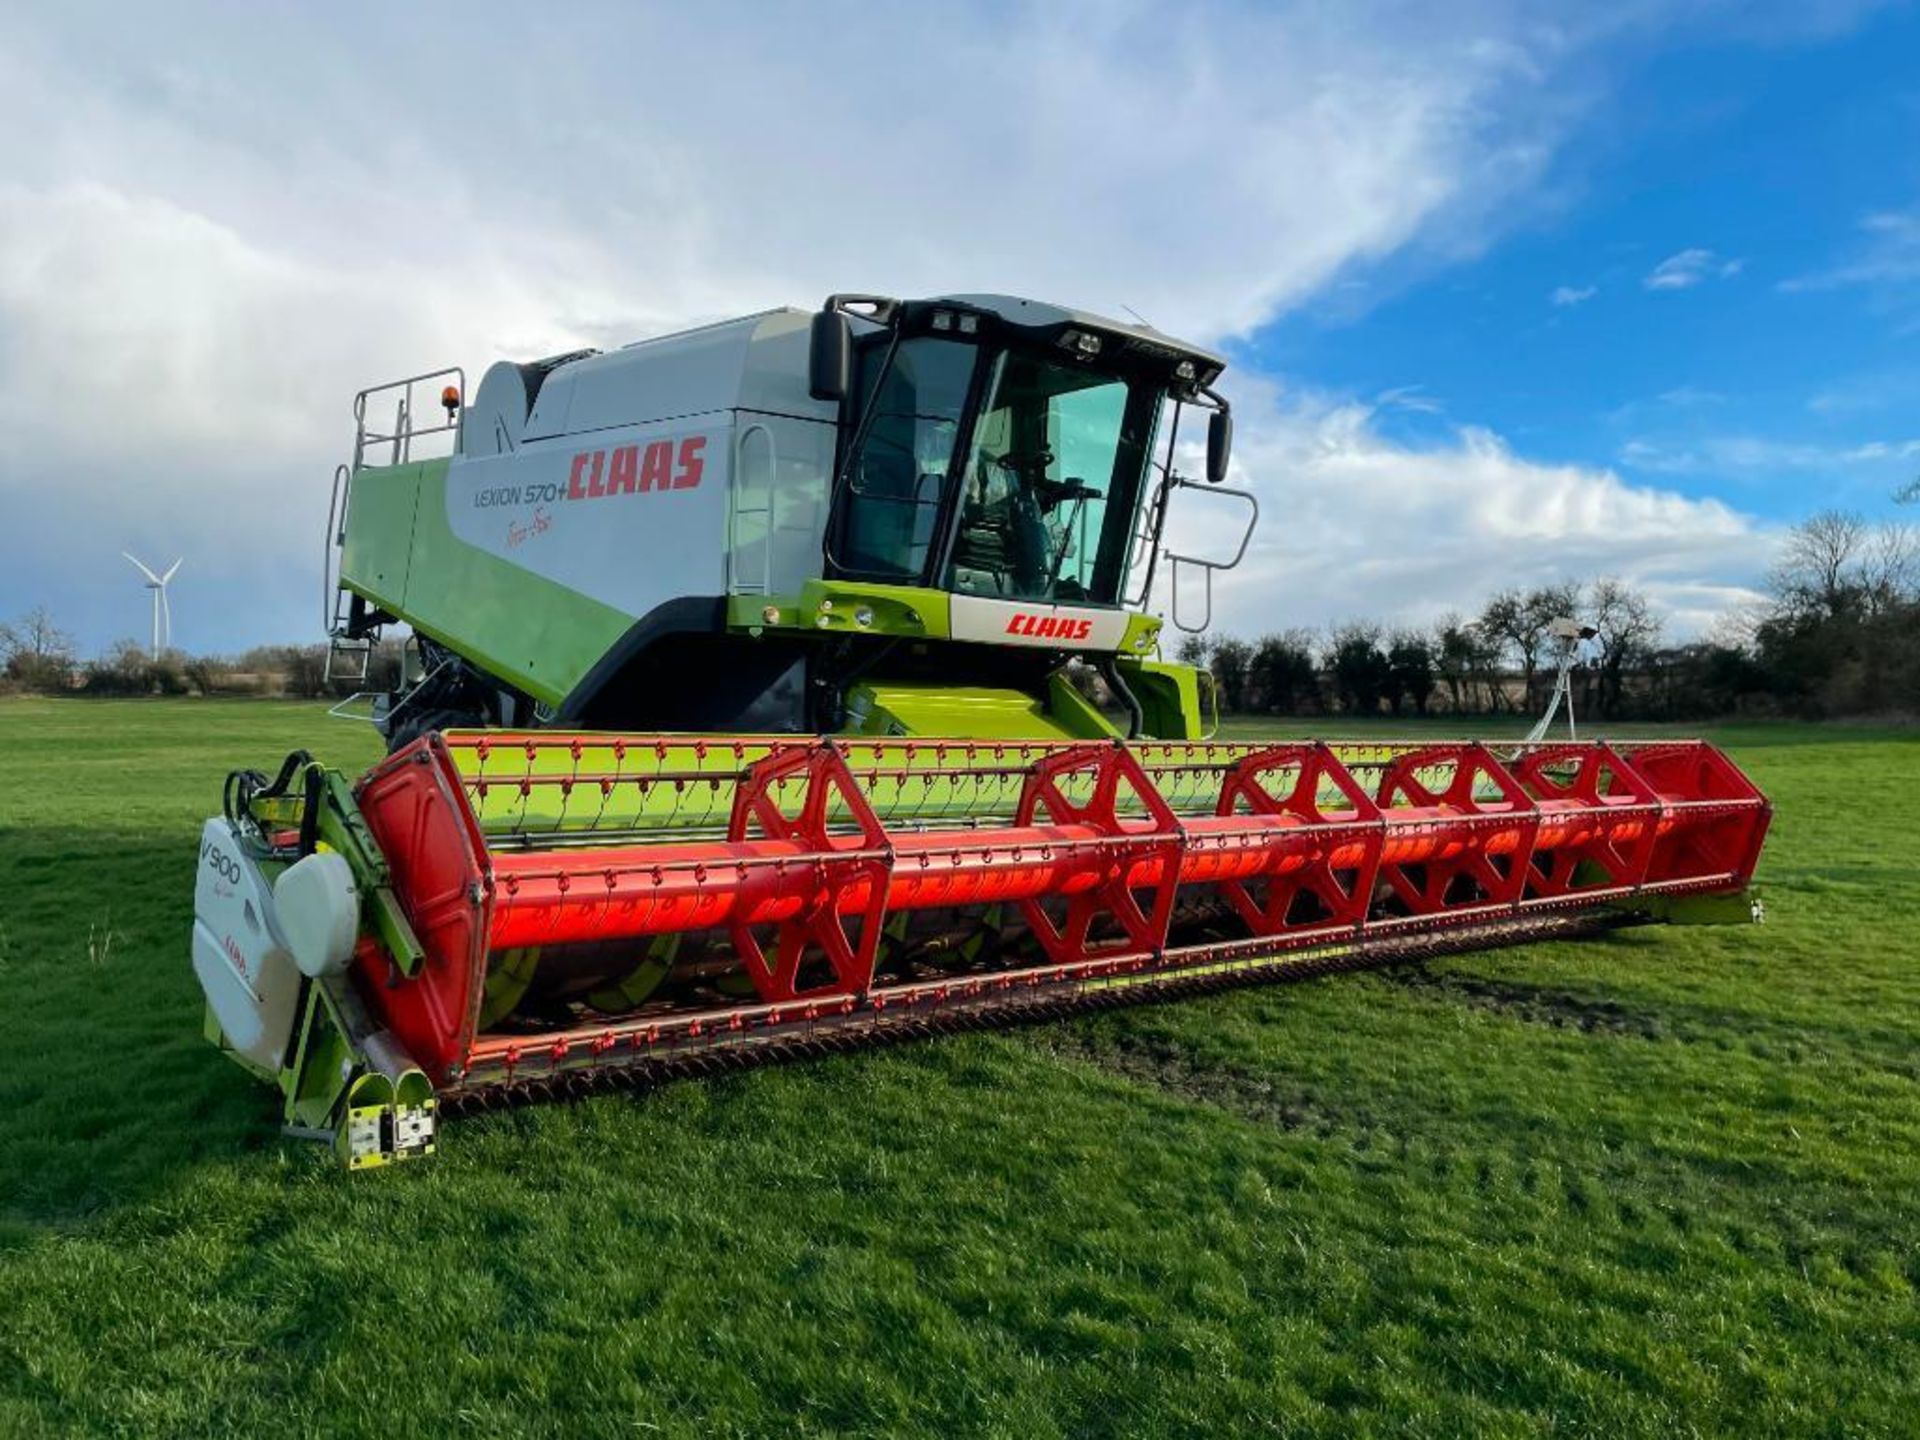 2007 Claas Lexion 570+TT Terra Trac combine harvester with straw chopper and Claas V900 header with